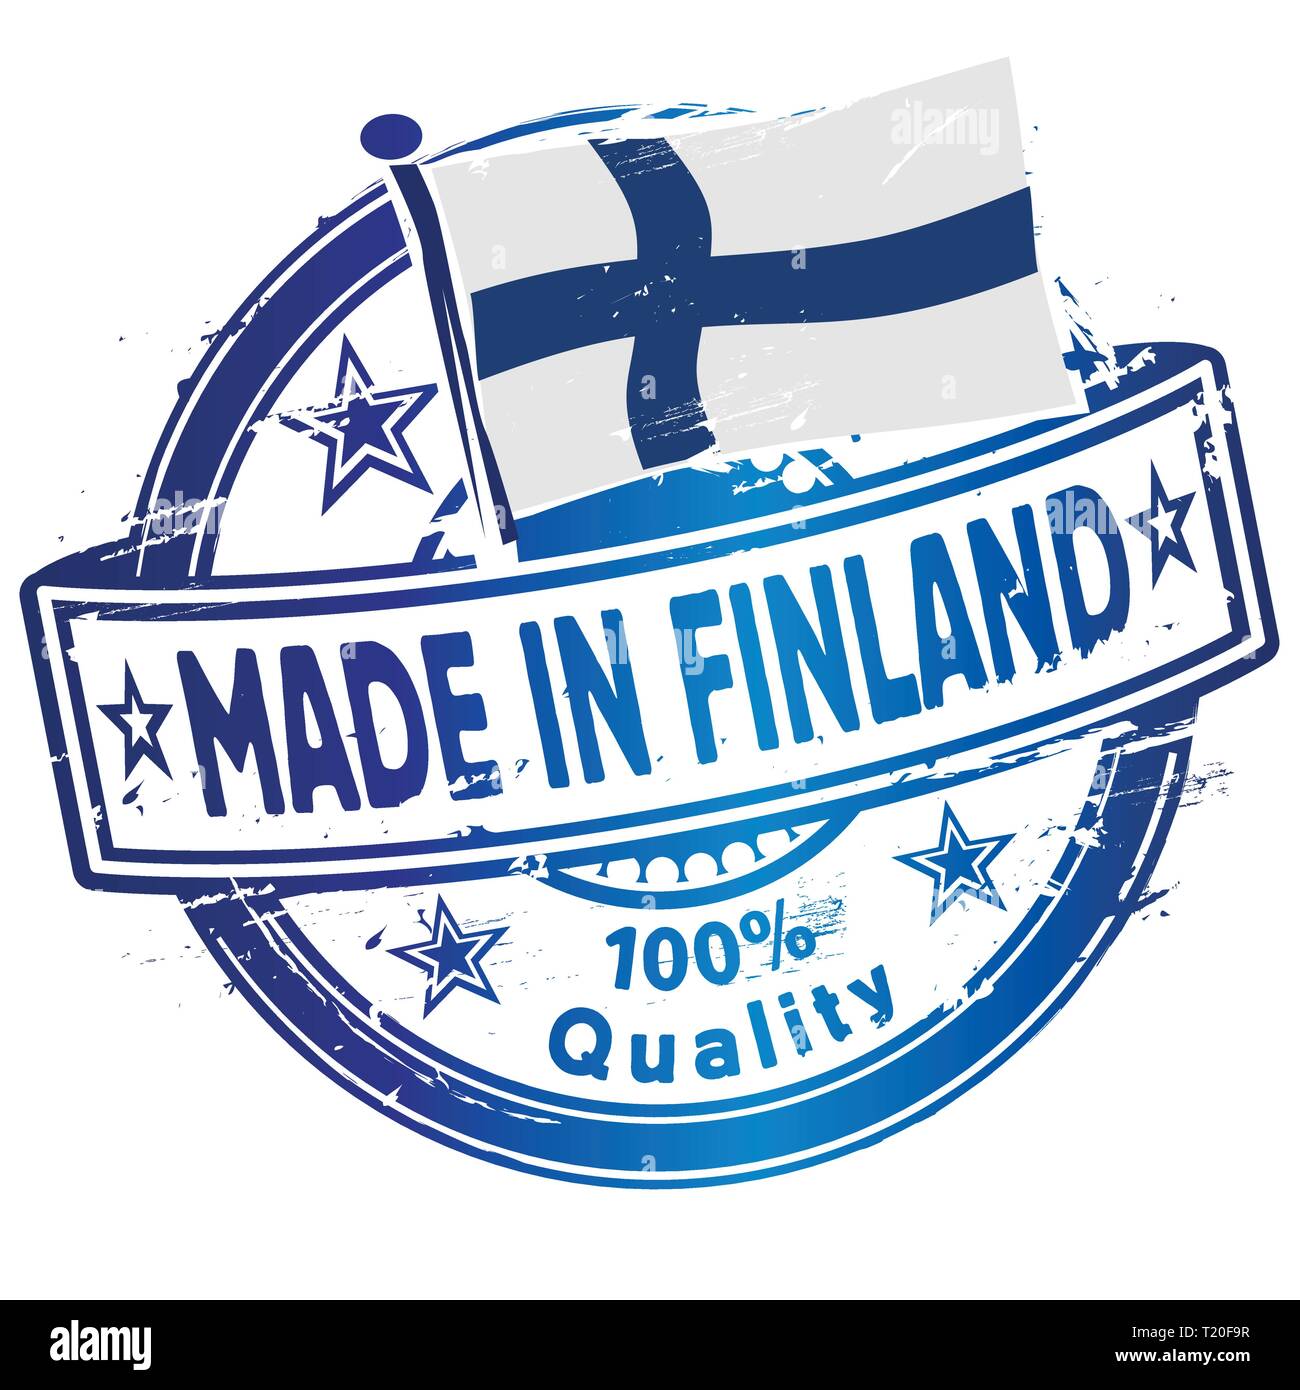 Rubber stamp made and production in Finland Stock Vector